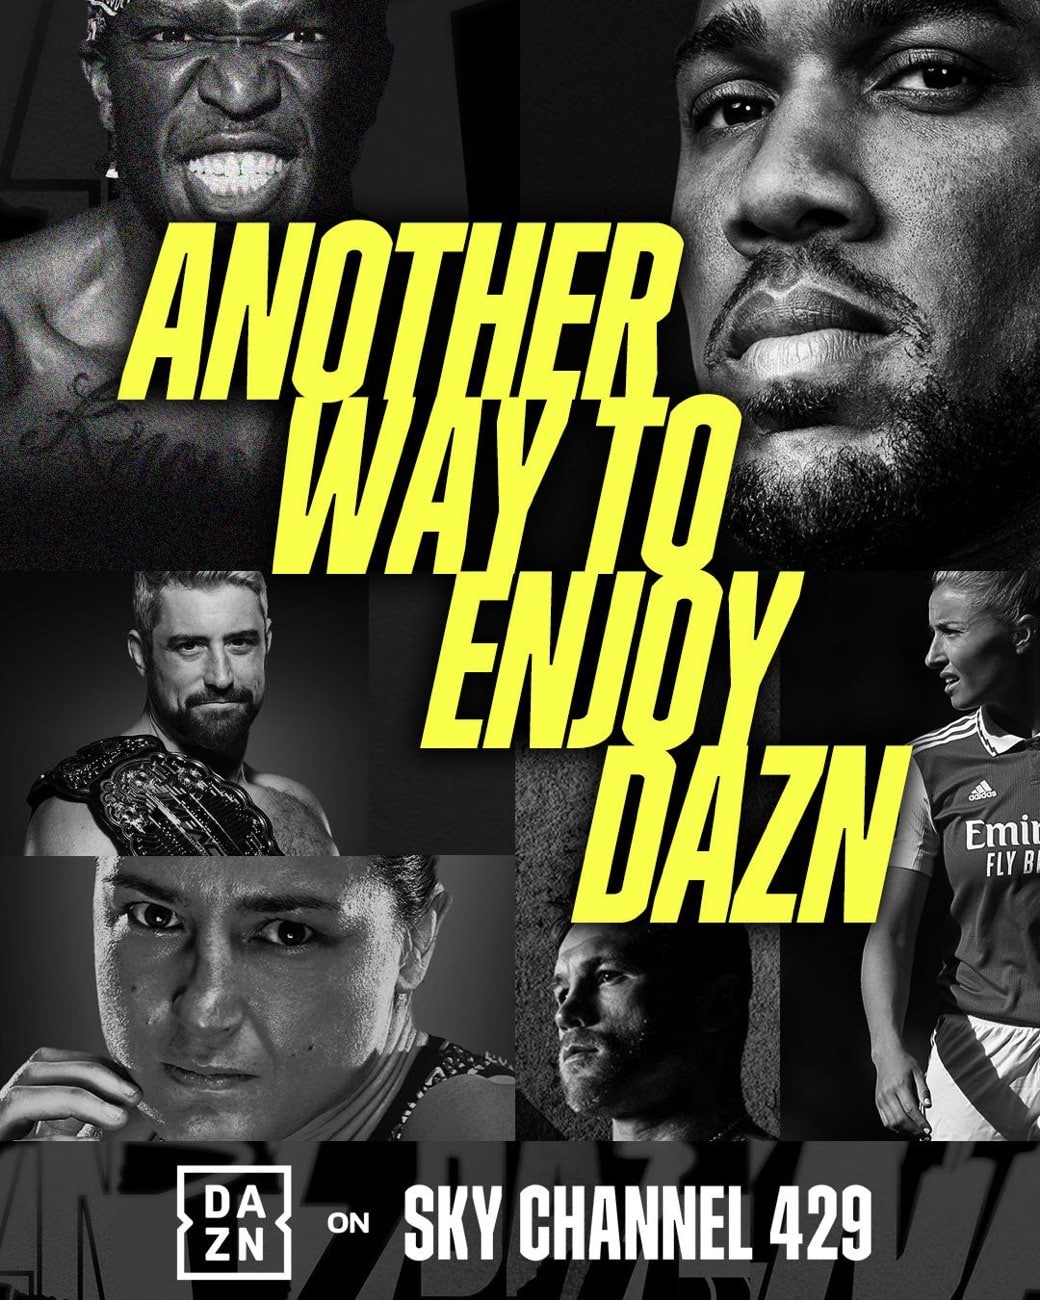 Image: DAZN Launches Channel 429 On Sky Ahead Of Anthony Joshua Fight On April 1